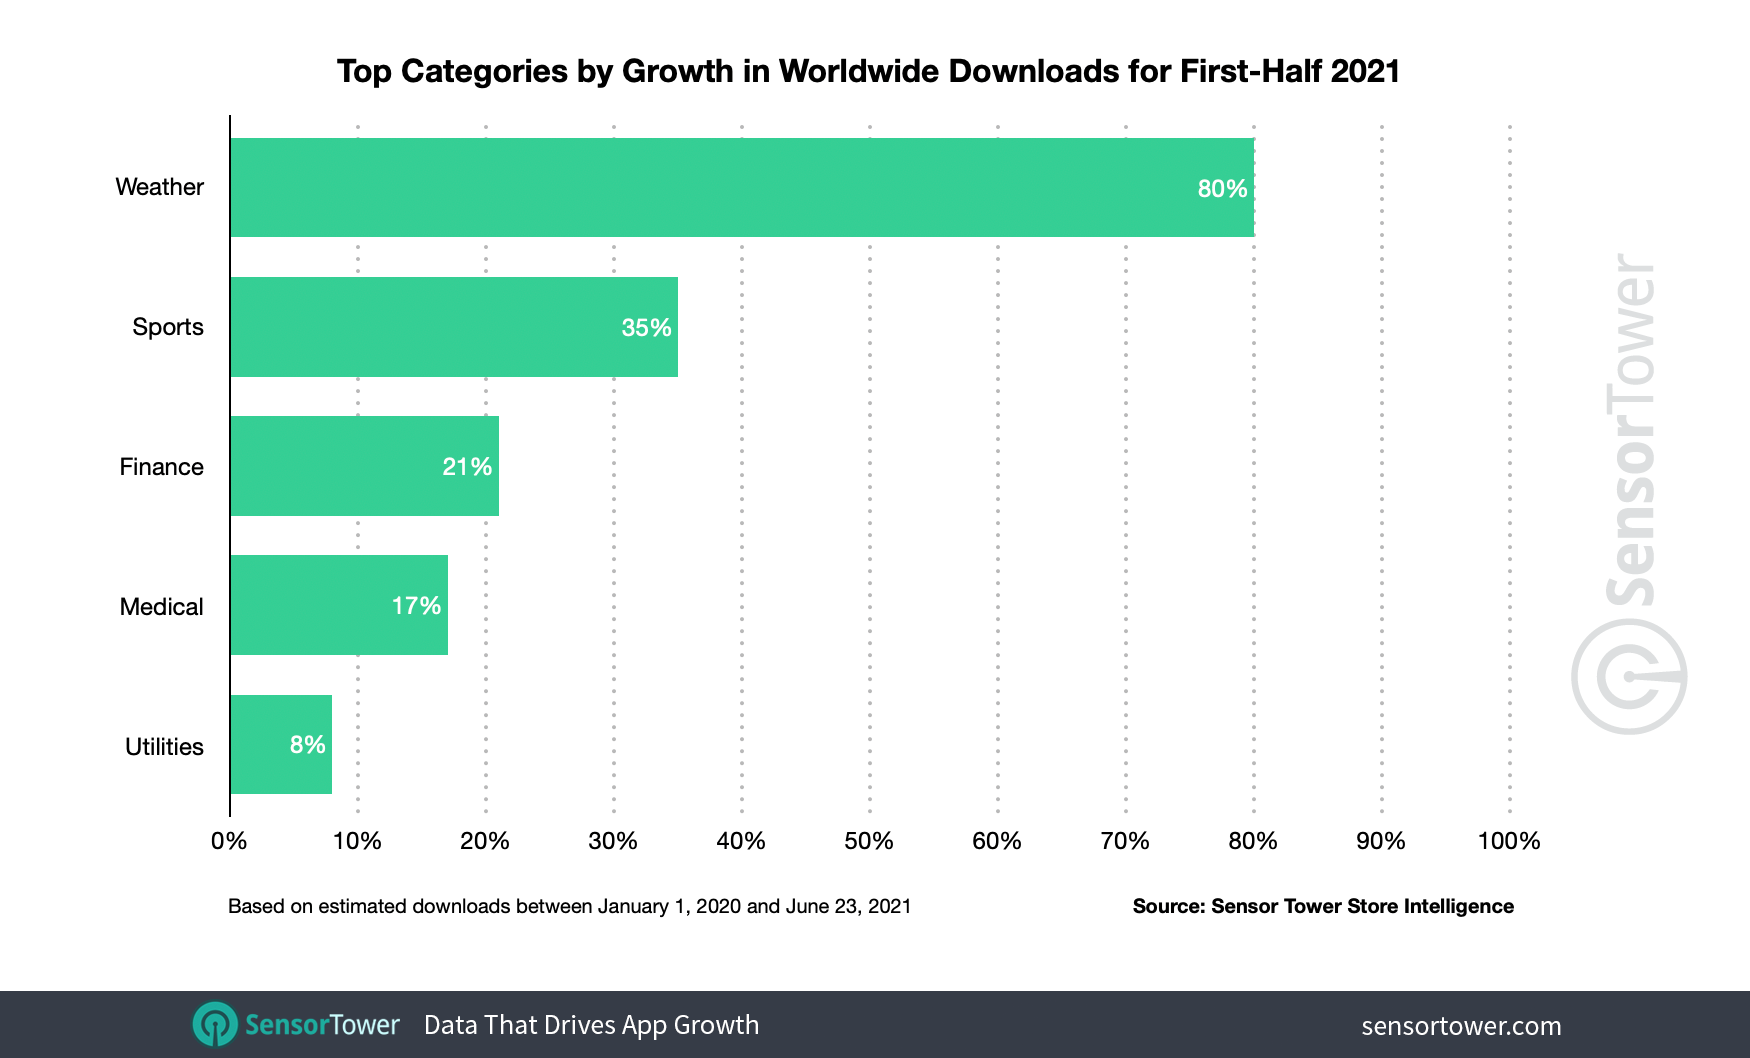 The top 10 categories by worldwide install growth